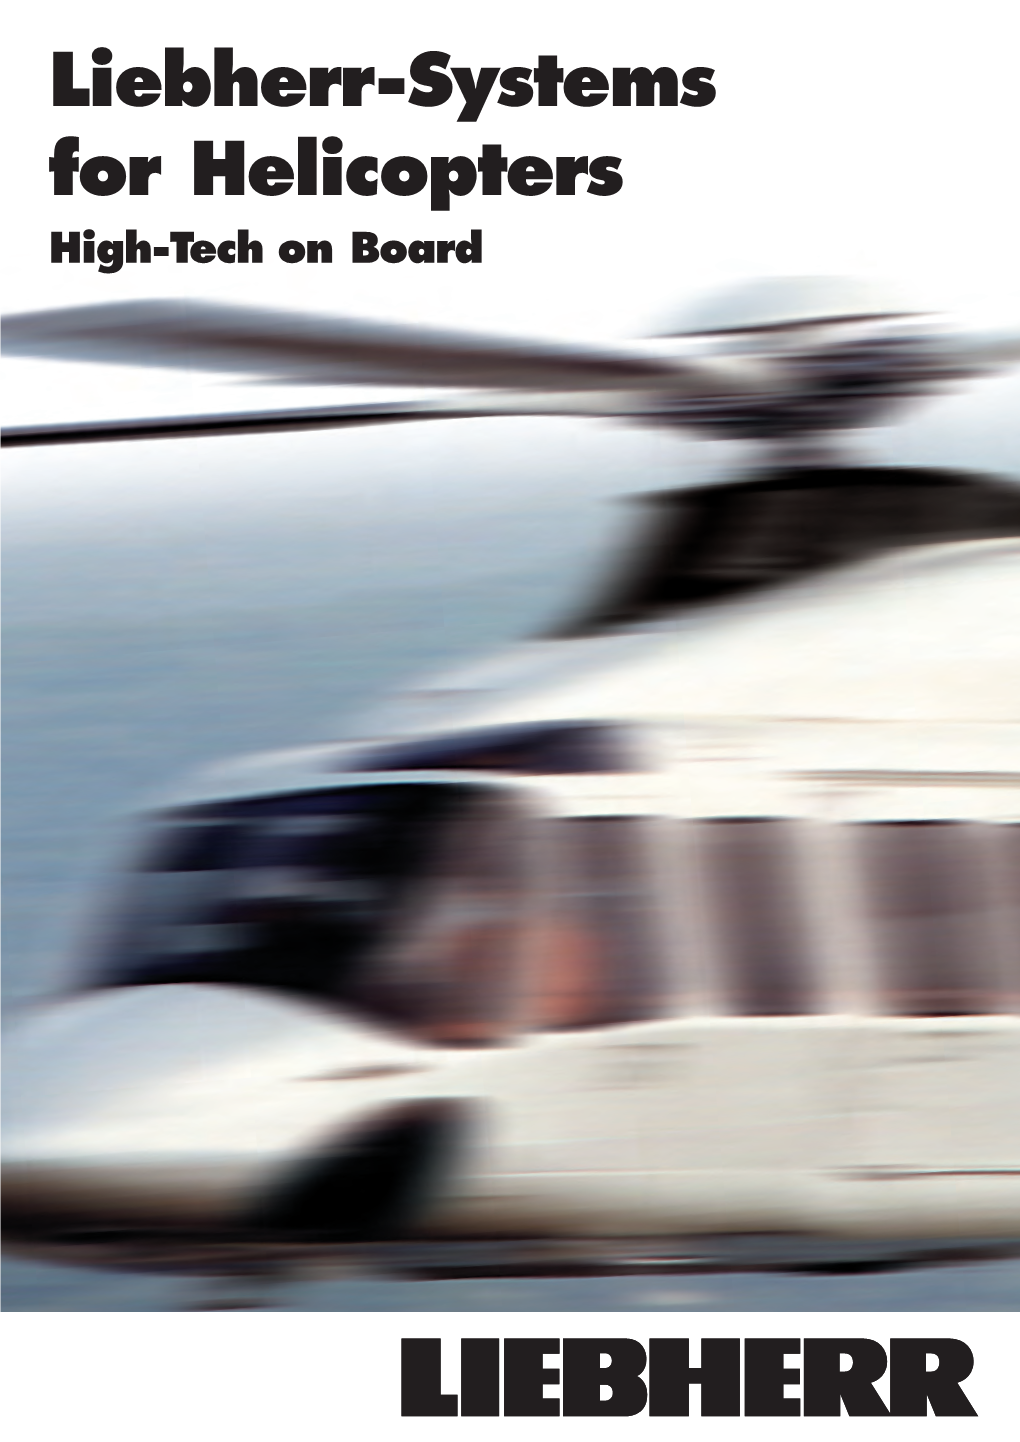 Liebherr-Systems for Helicopters High-Tech on Board